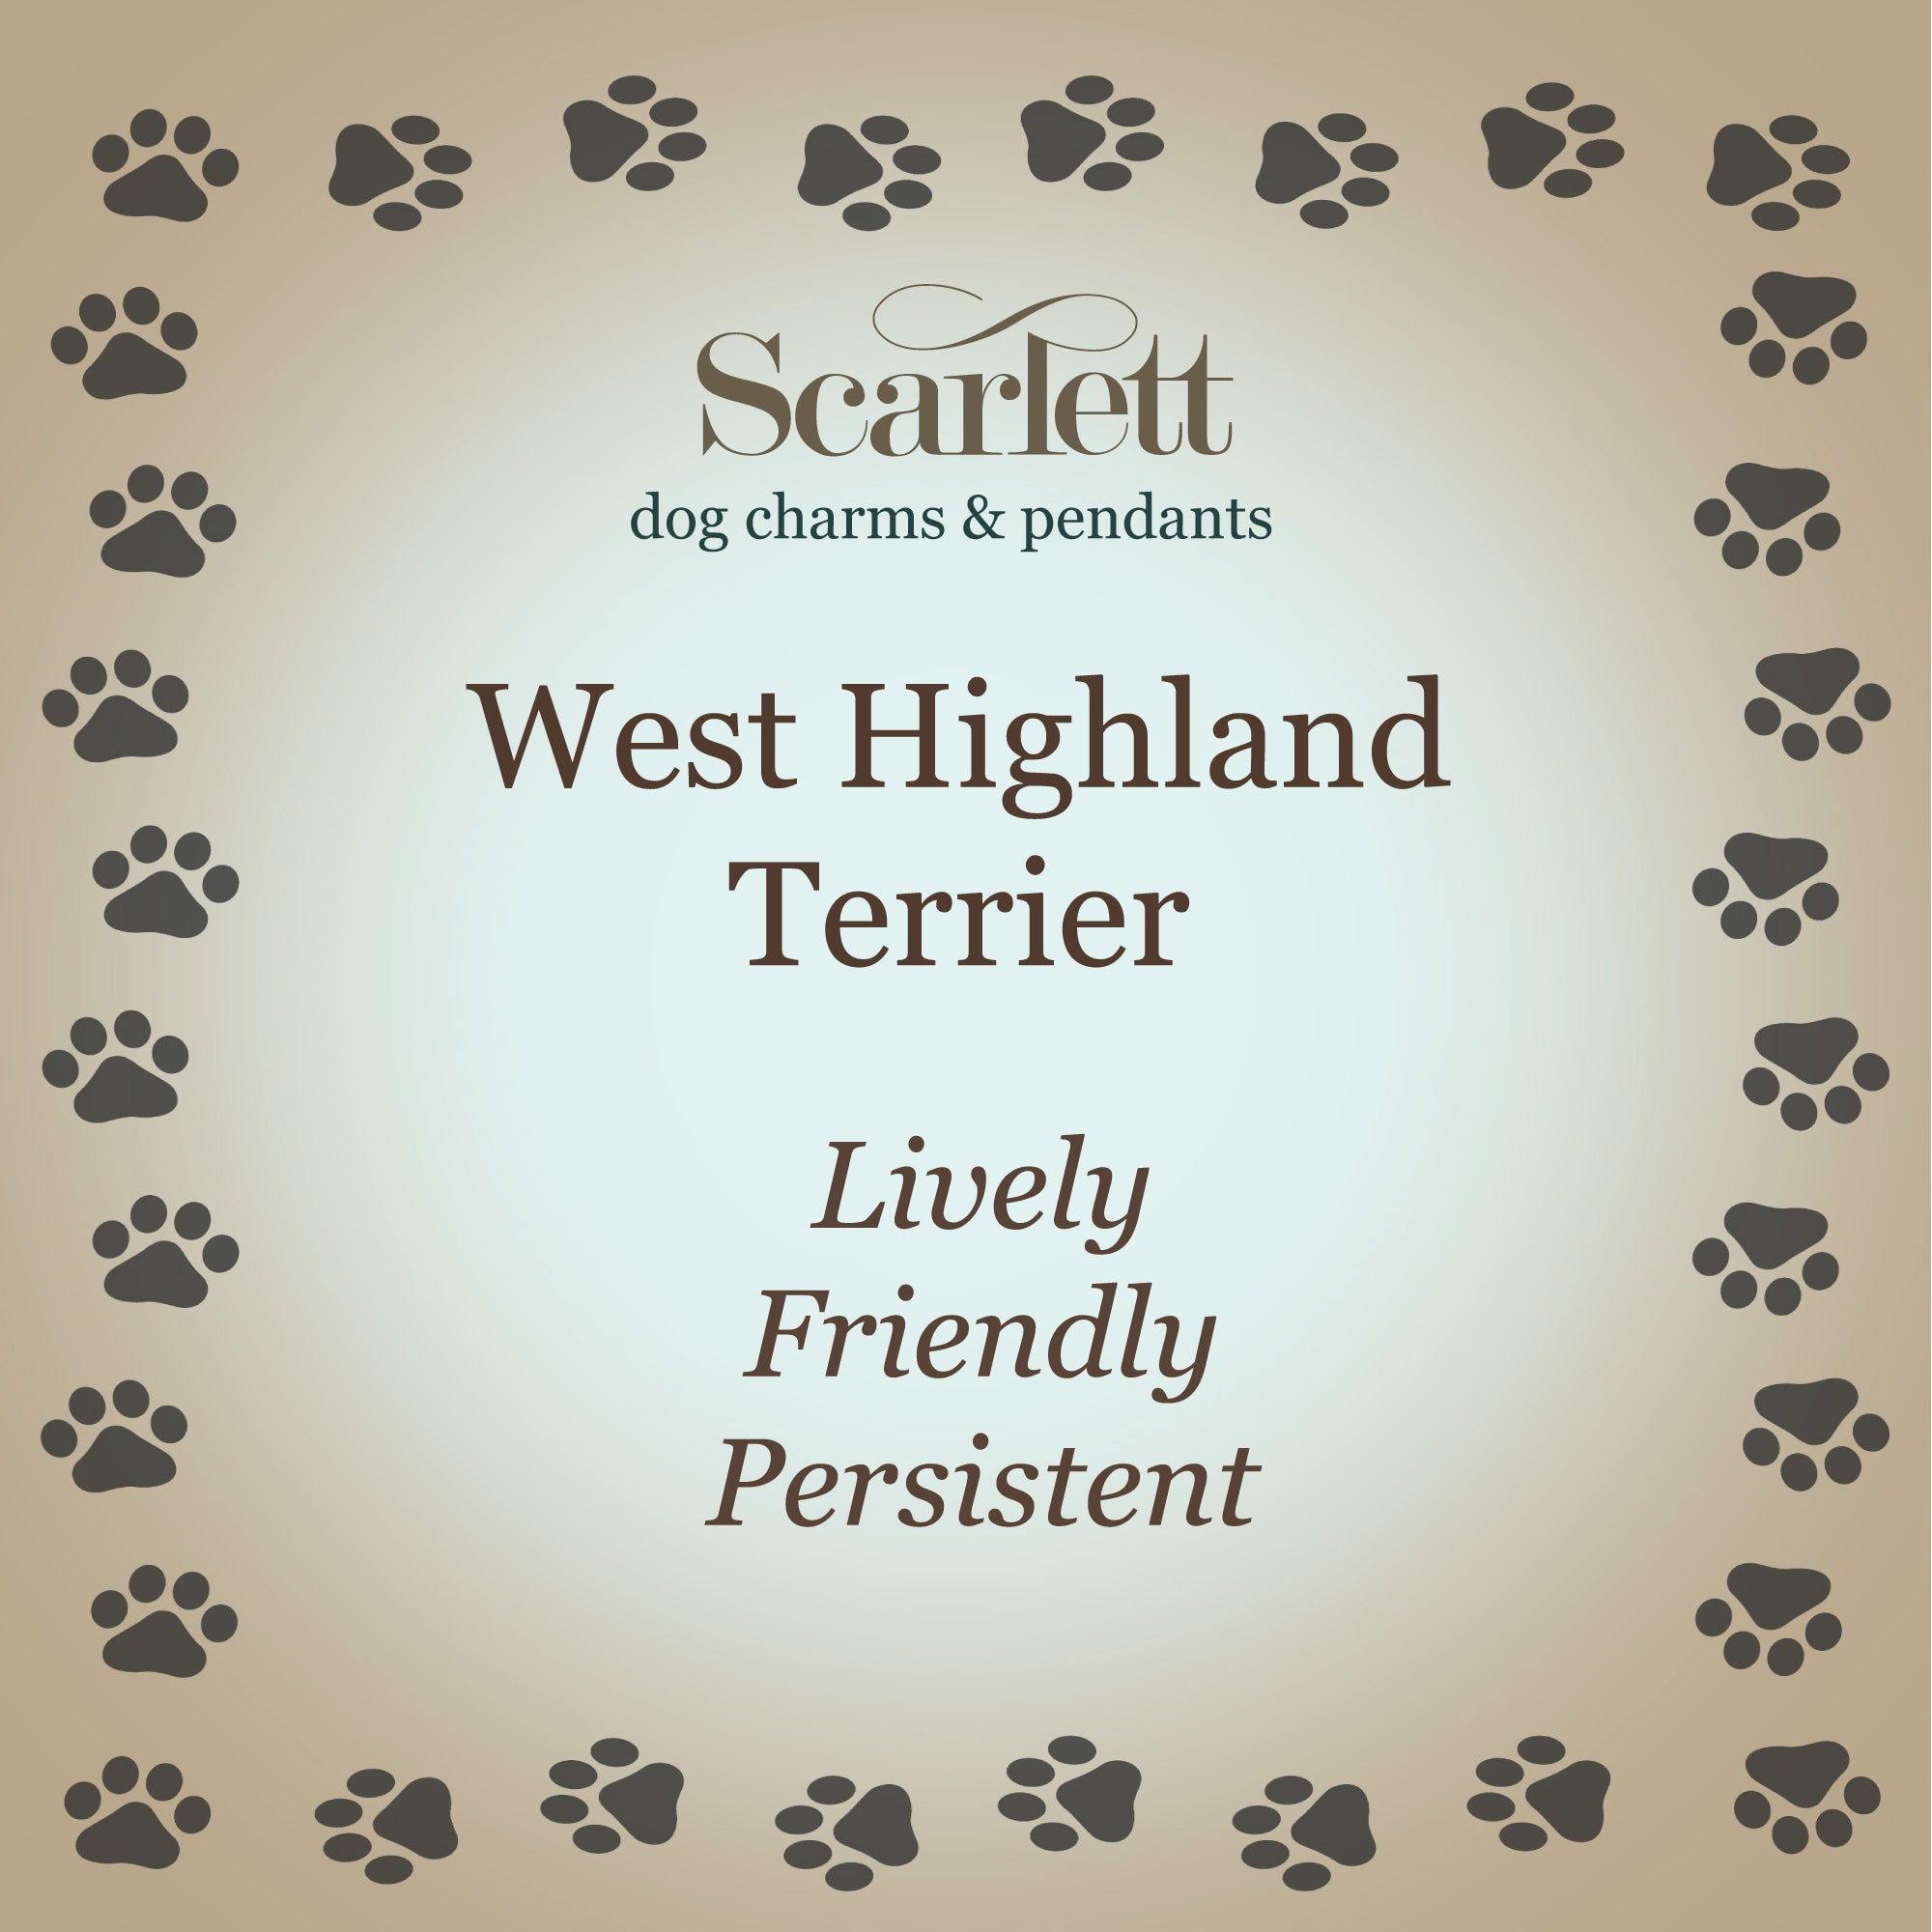 West Highland Terrier Westie Silver dog necklace gift for pet loss Scarlett Jewellery UK